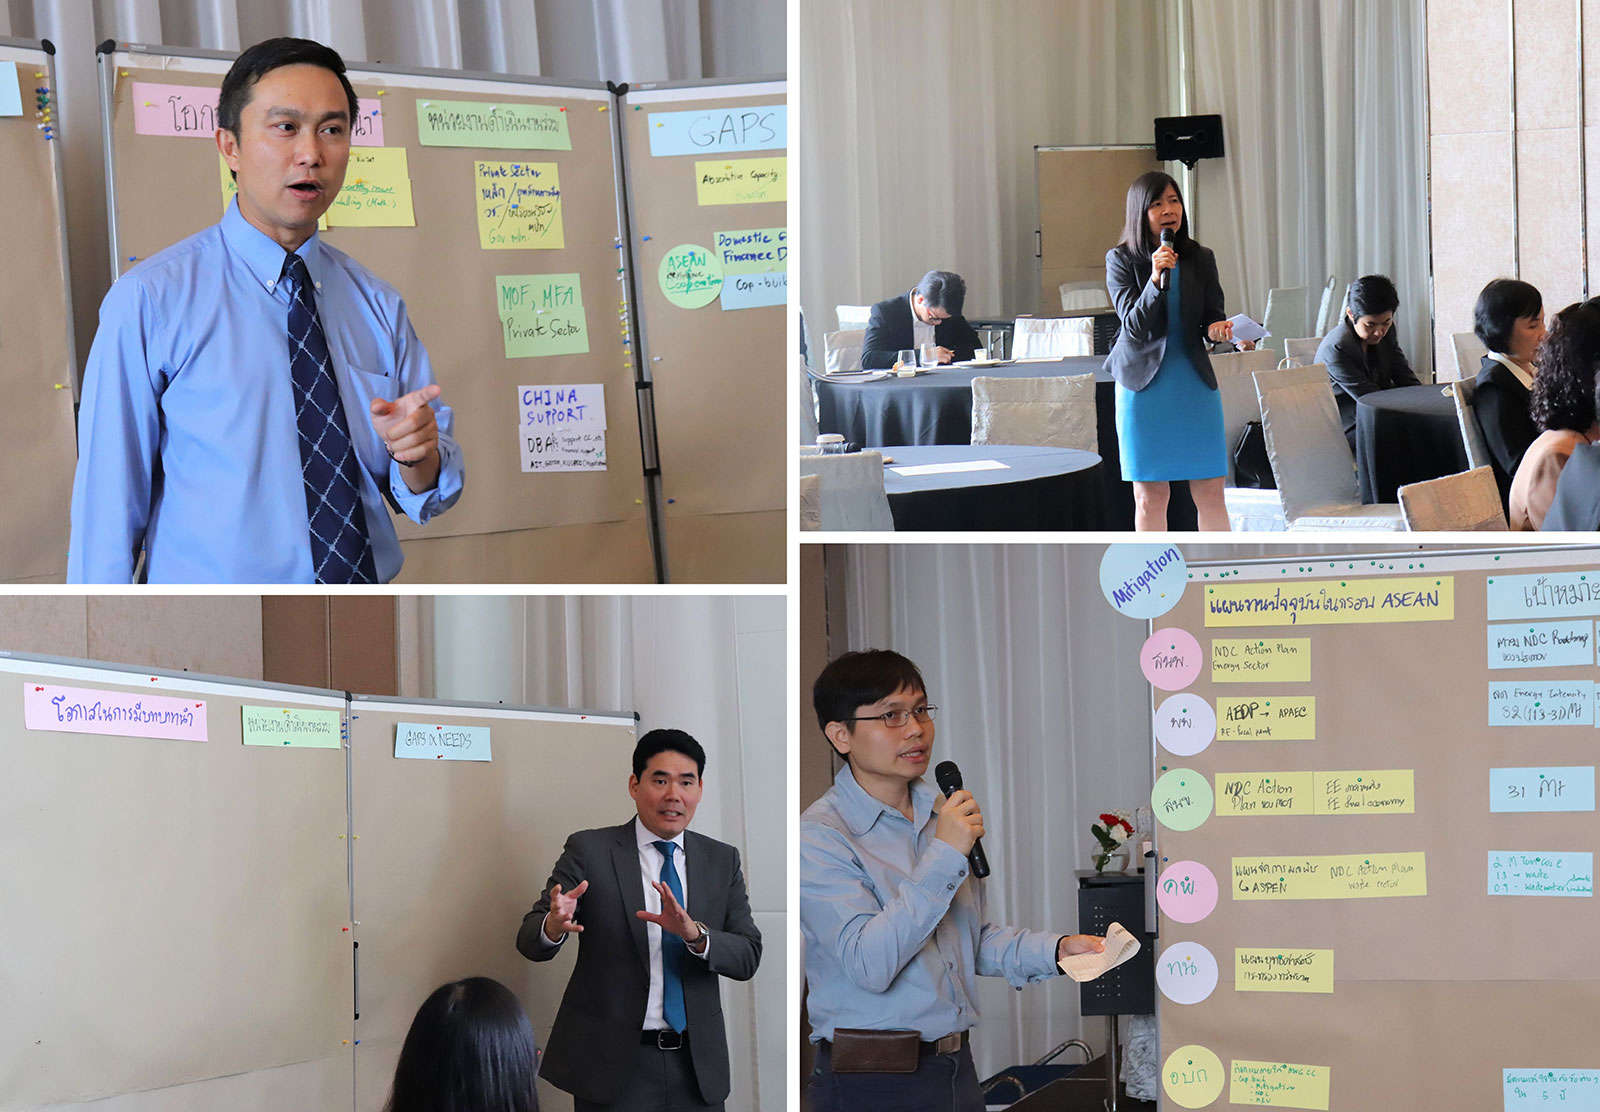 A hearing with experts was held to consult on the draft ASEAN Action Plan on Climate Change and Thailand’s strategic role ahead of its ASEAN chairmanship next year.